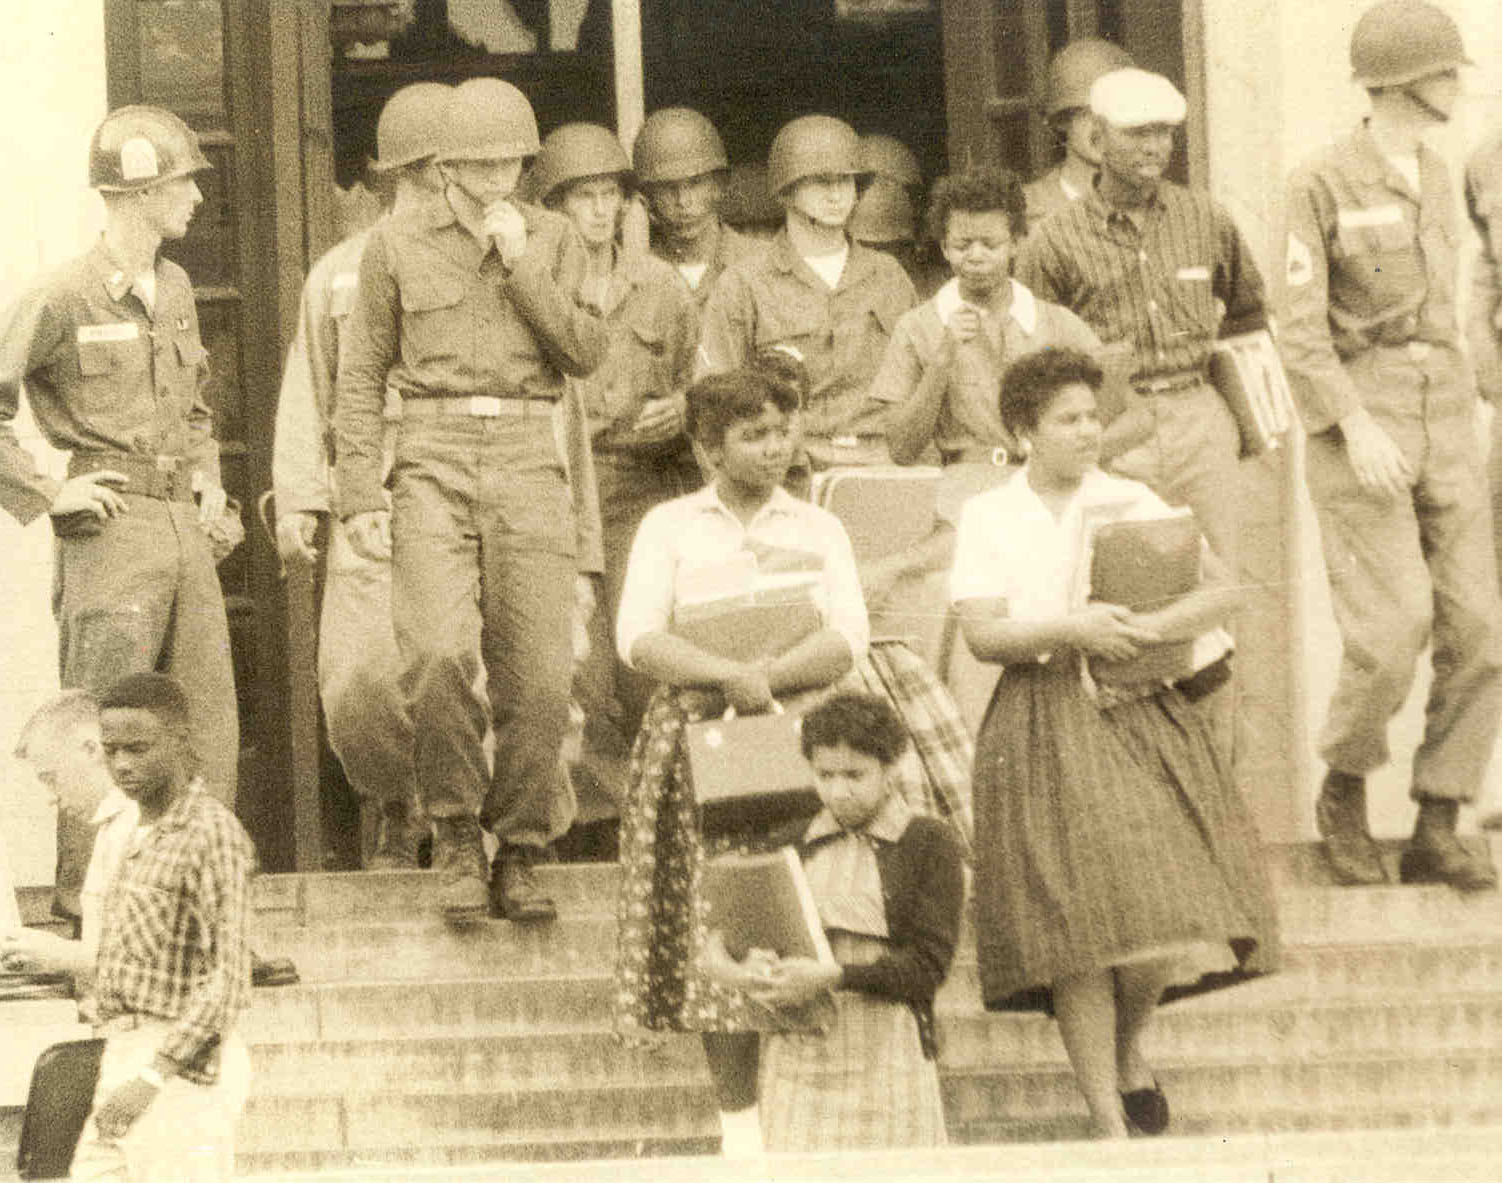 101st U.S. Airborne Division escorting the Little Rock Nine into Central High School